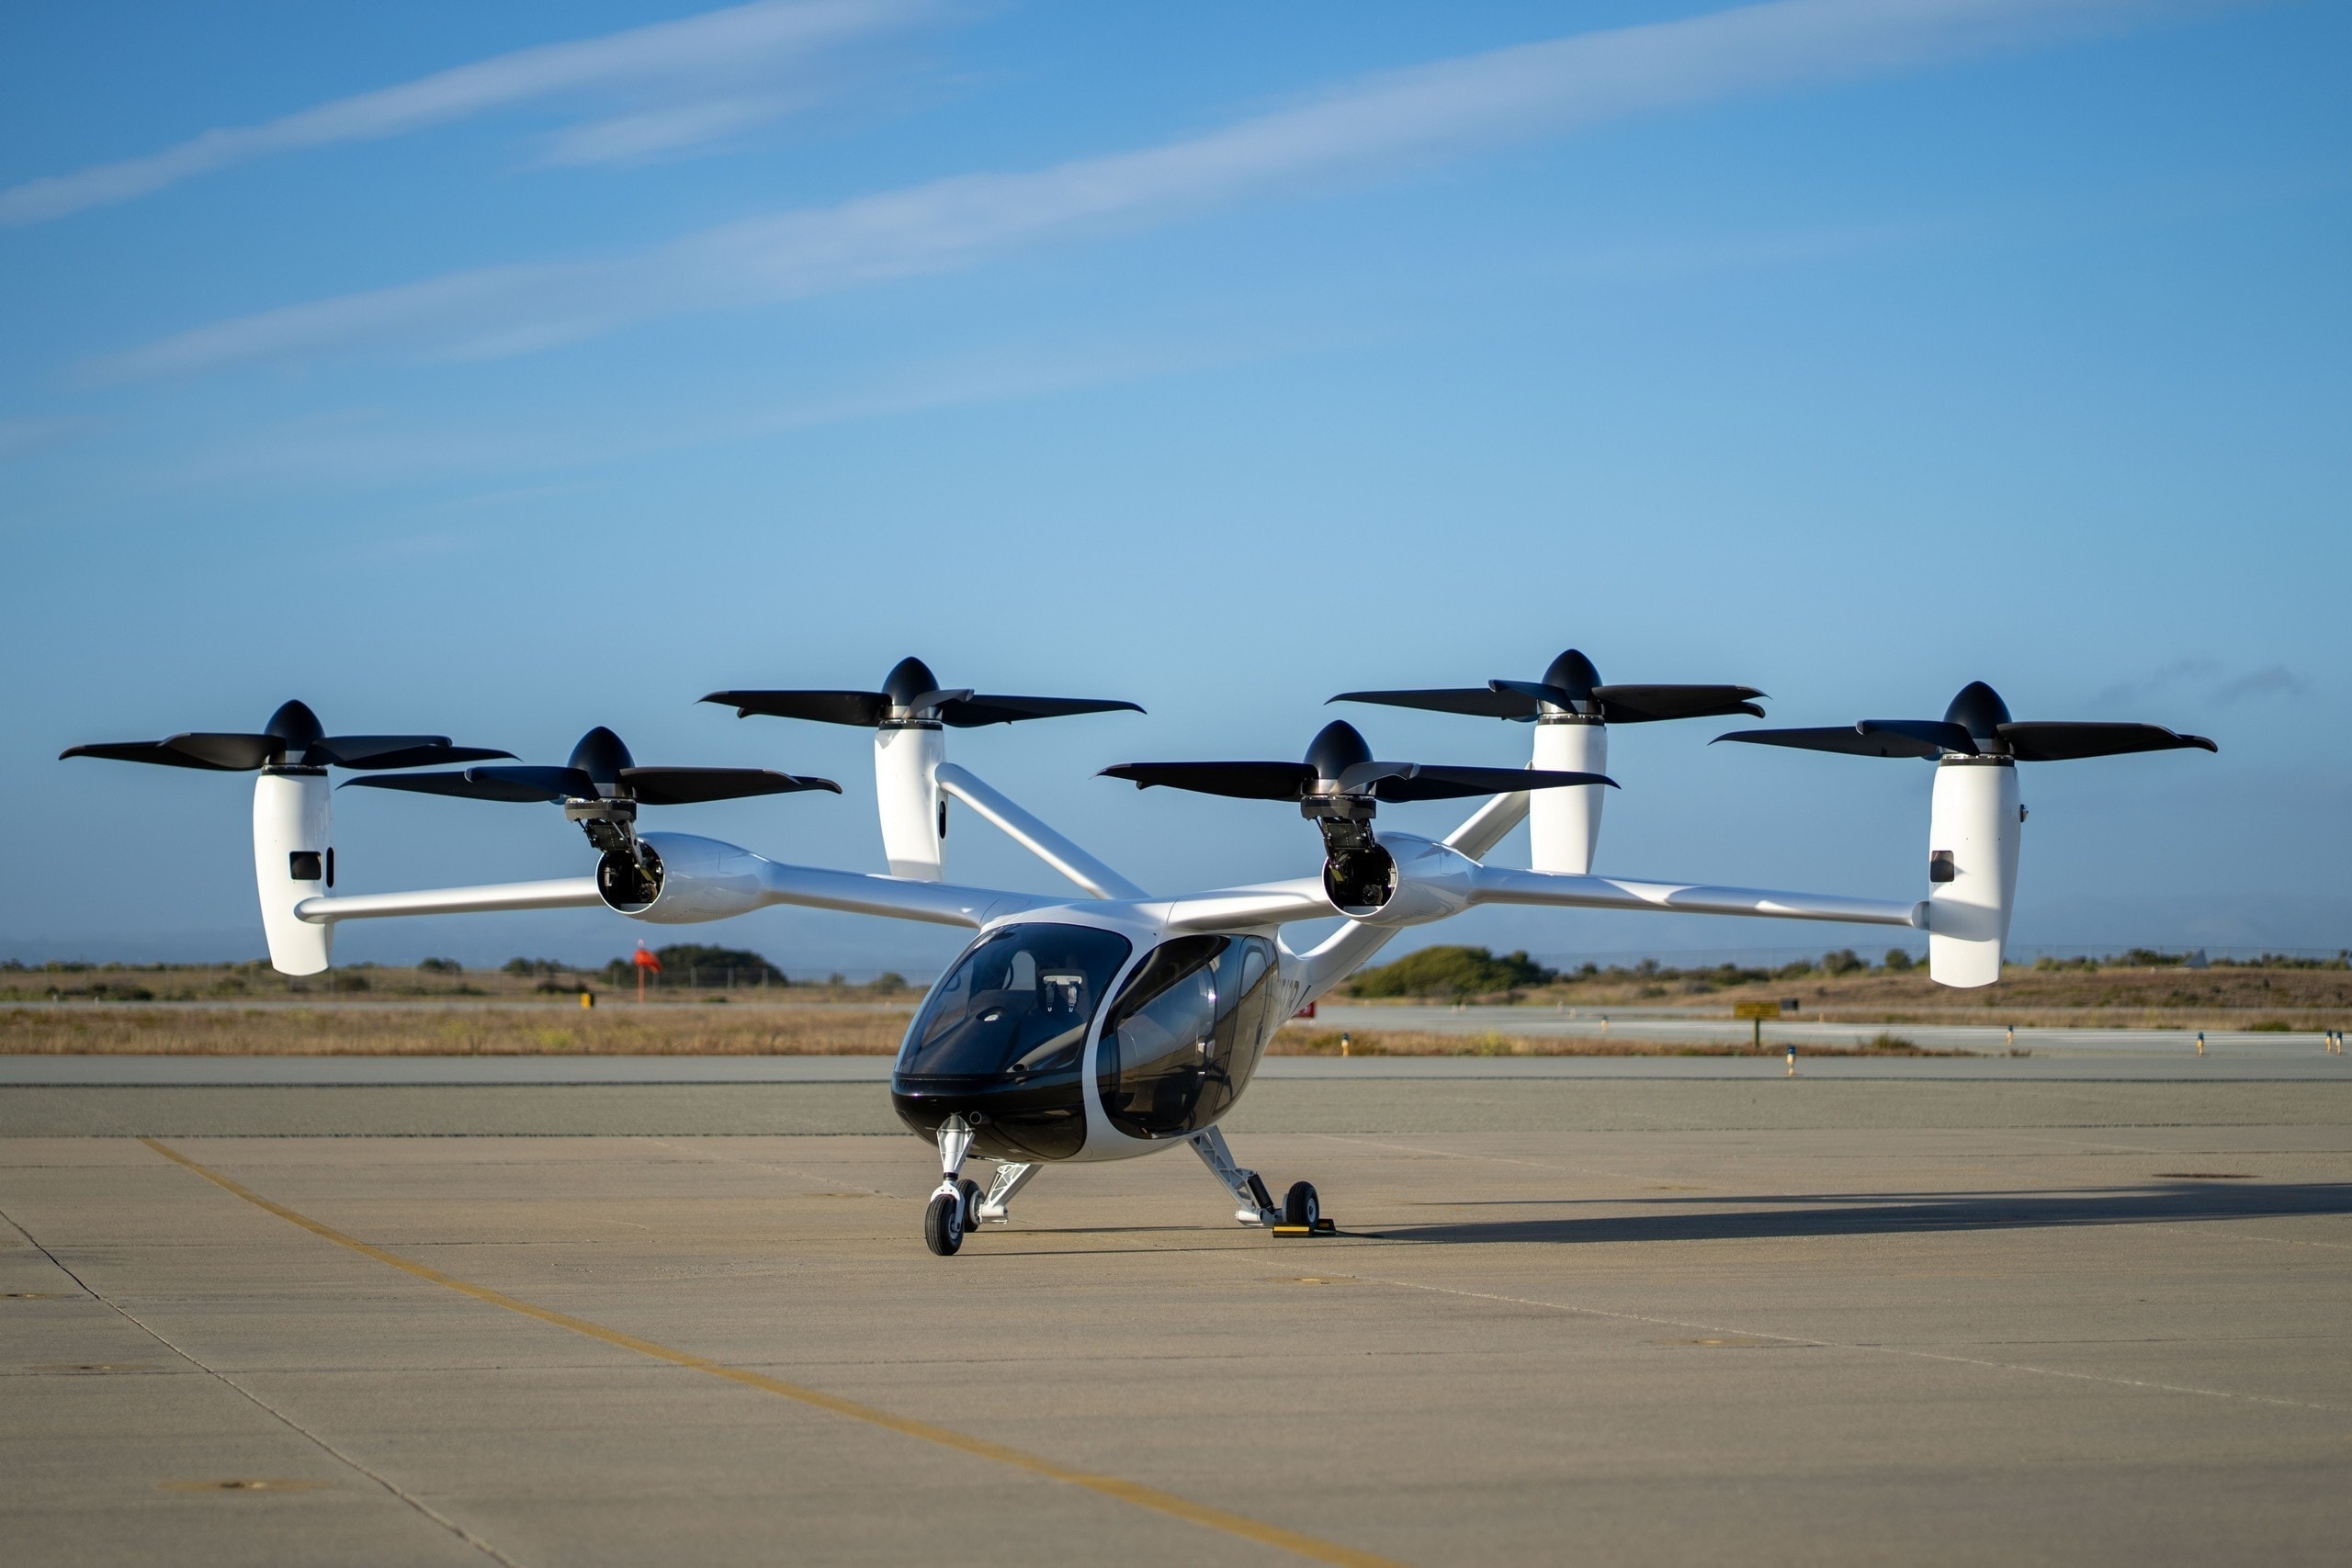 Joby's Electric Air Taxi